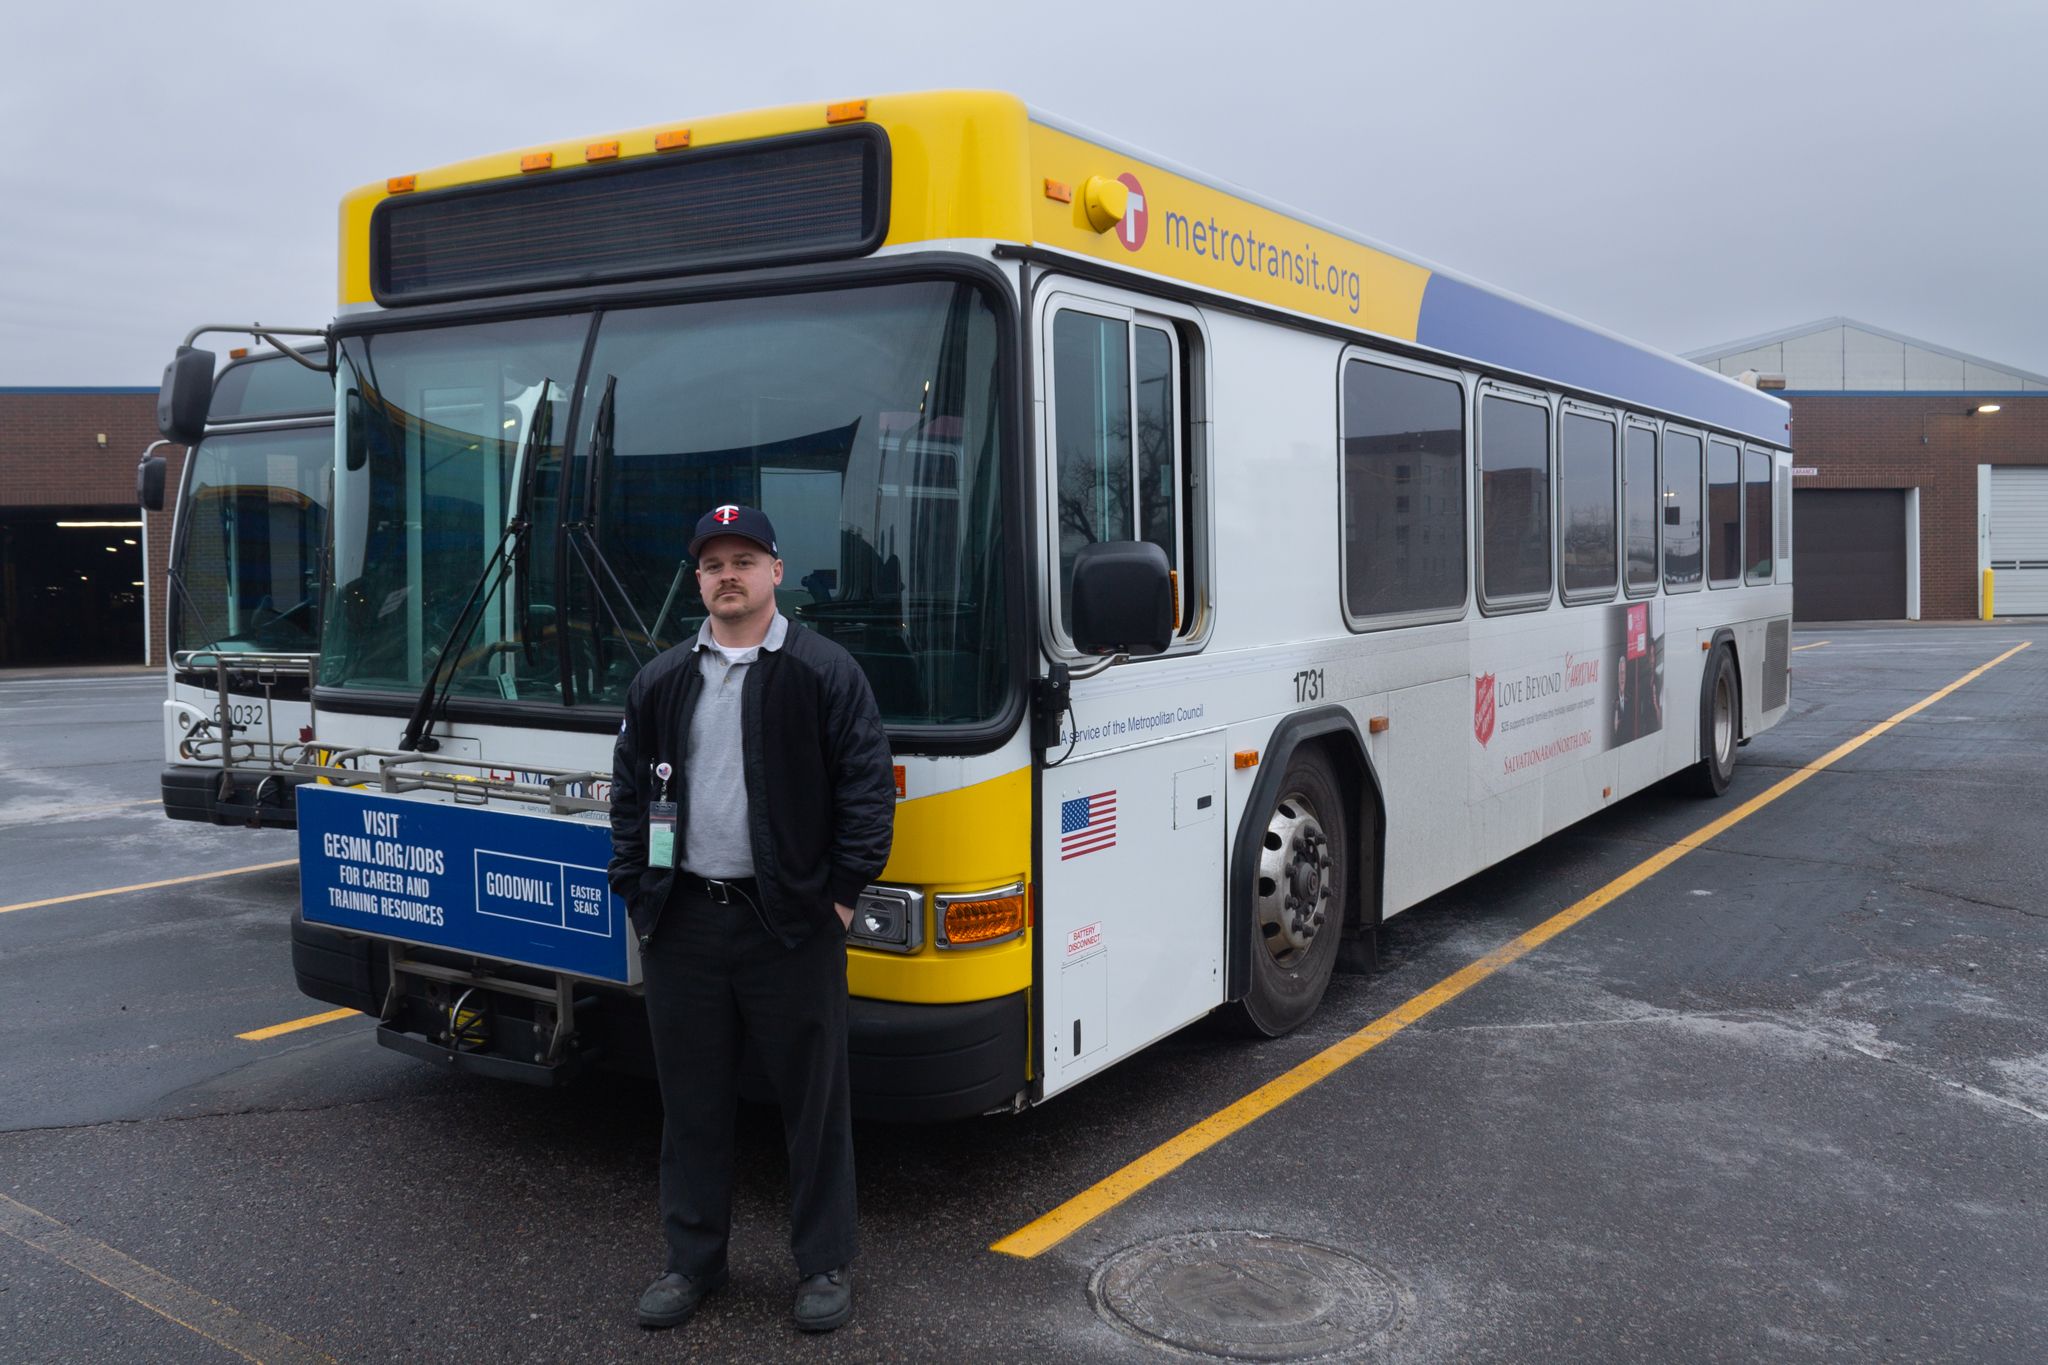 Adam Burch, bus operator, stands in front of a bus after a shift.